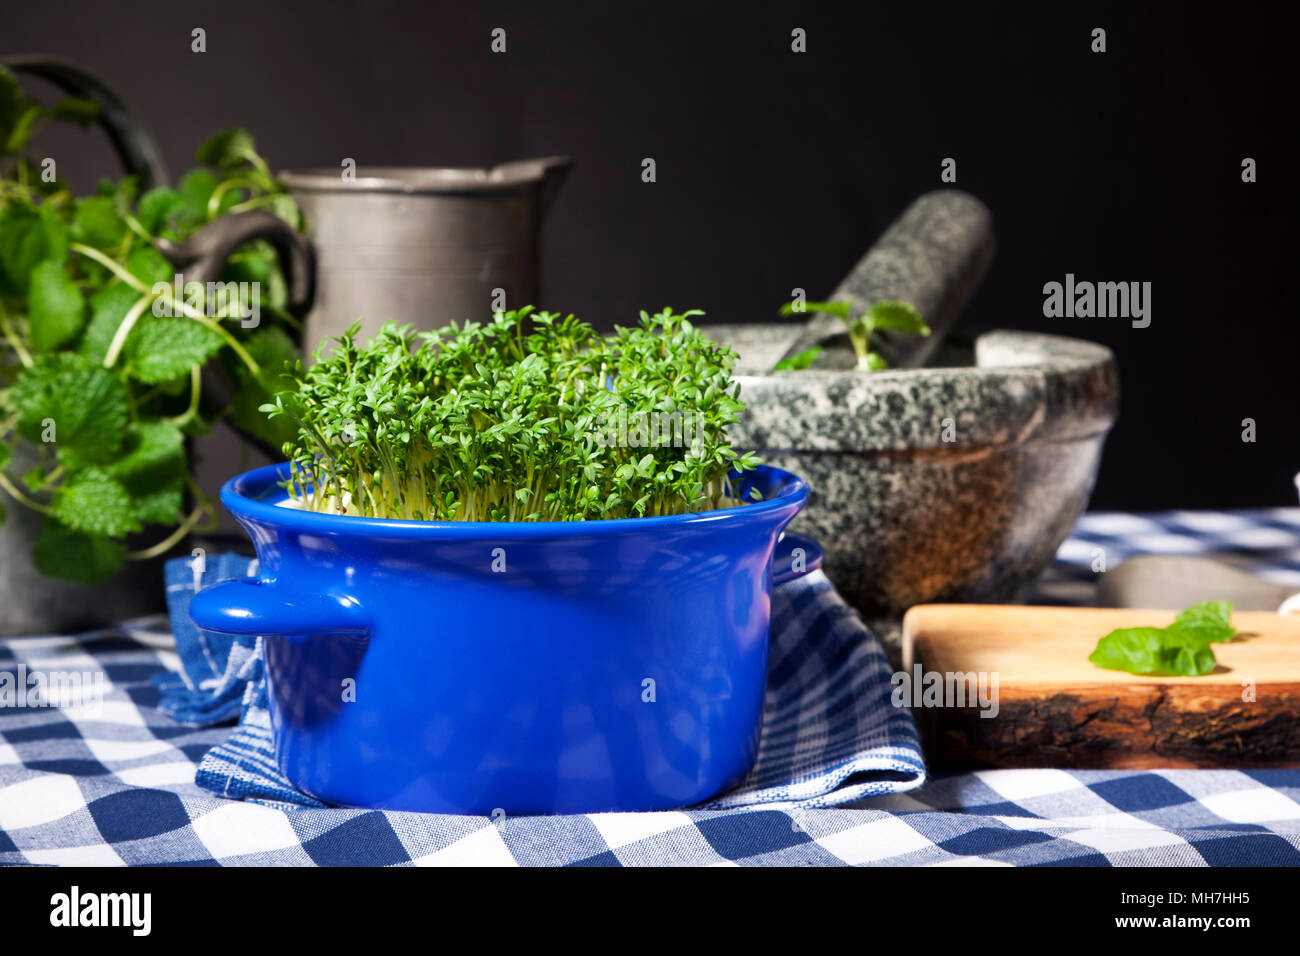 Garden cress plant in blue pot on kitchen table Stock Photo